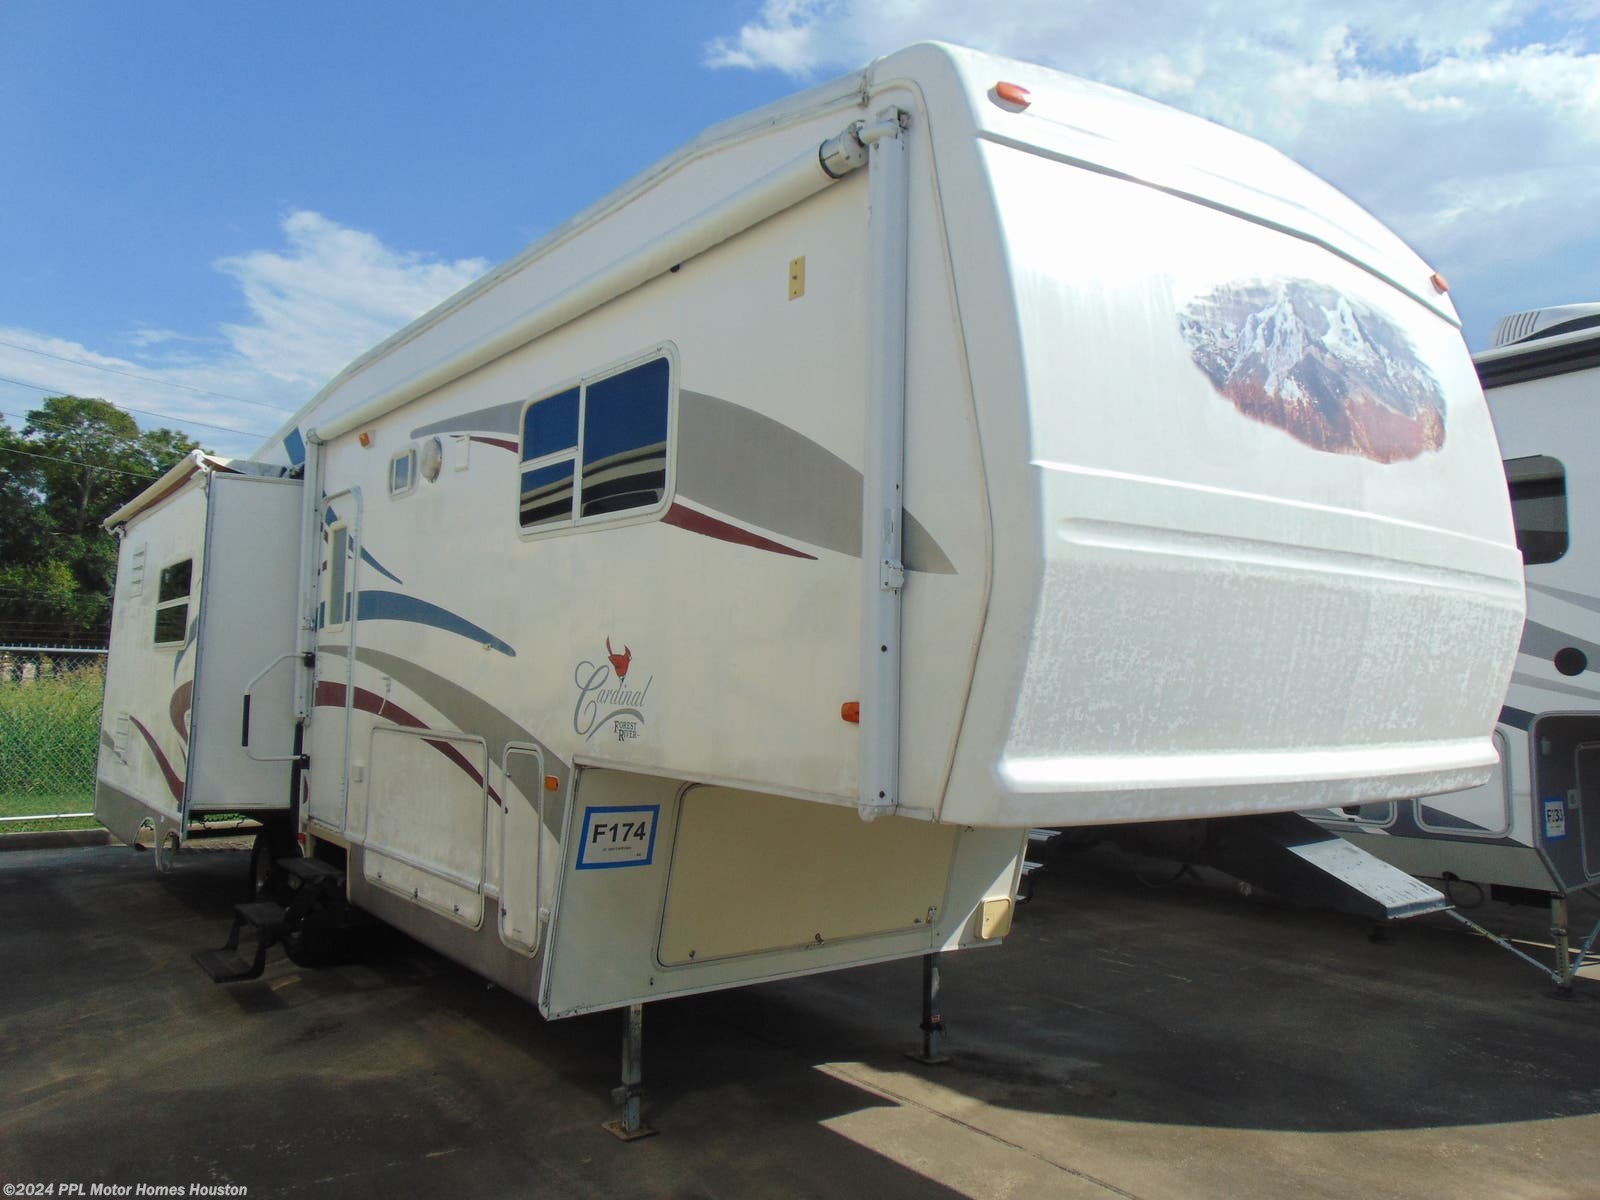 2003 Forest River Cardinal 31TS RV for Sale in Houston, TX 77074 | F174 2003 Forest River Cardinal 5th Wheel Owners Manual